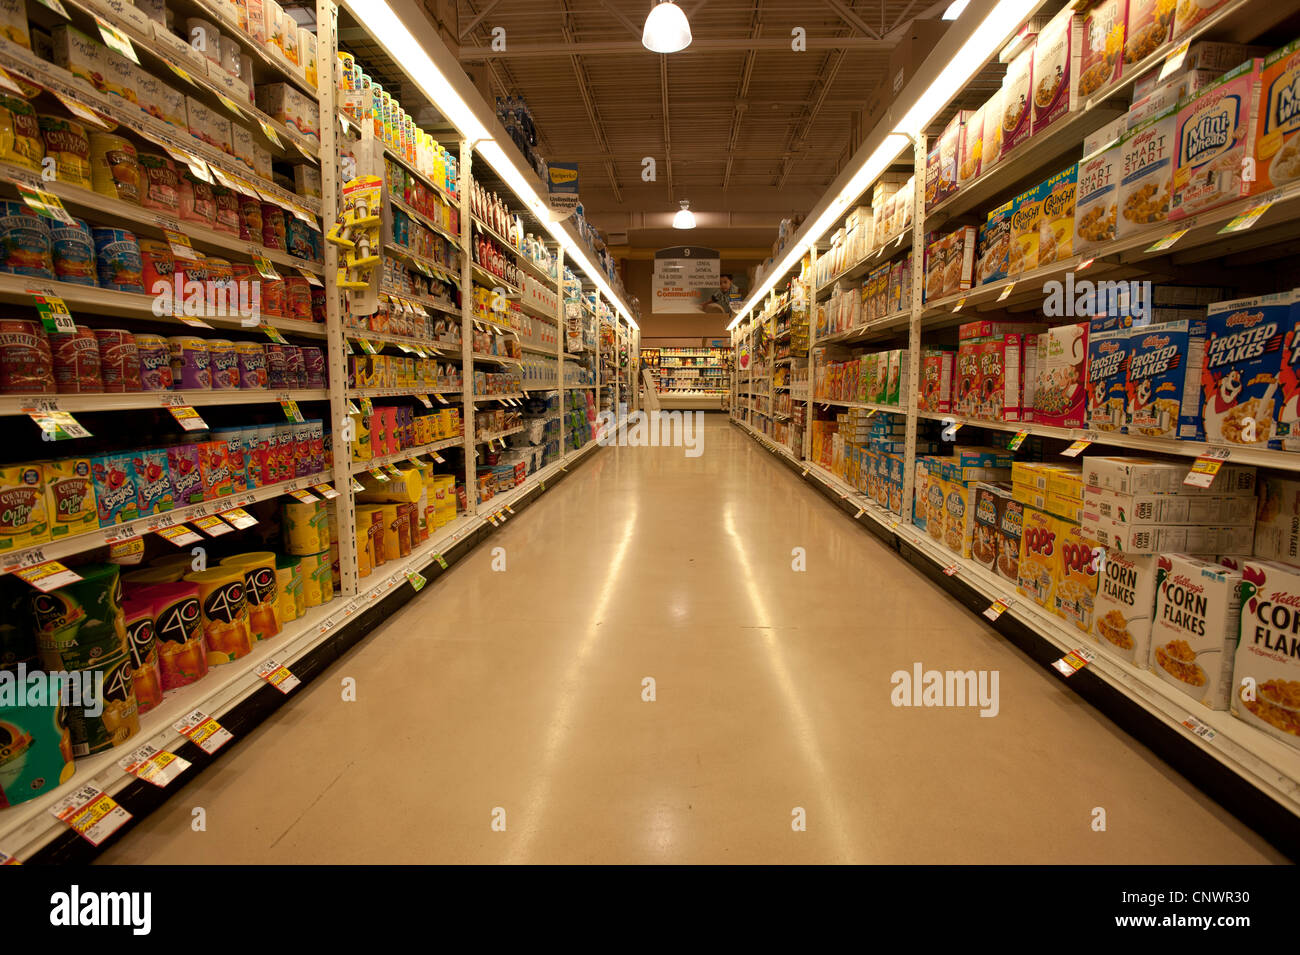 Isle in the grocery store Stock Photo